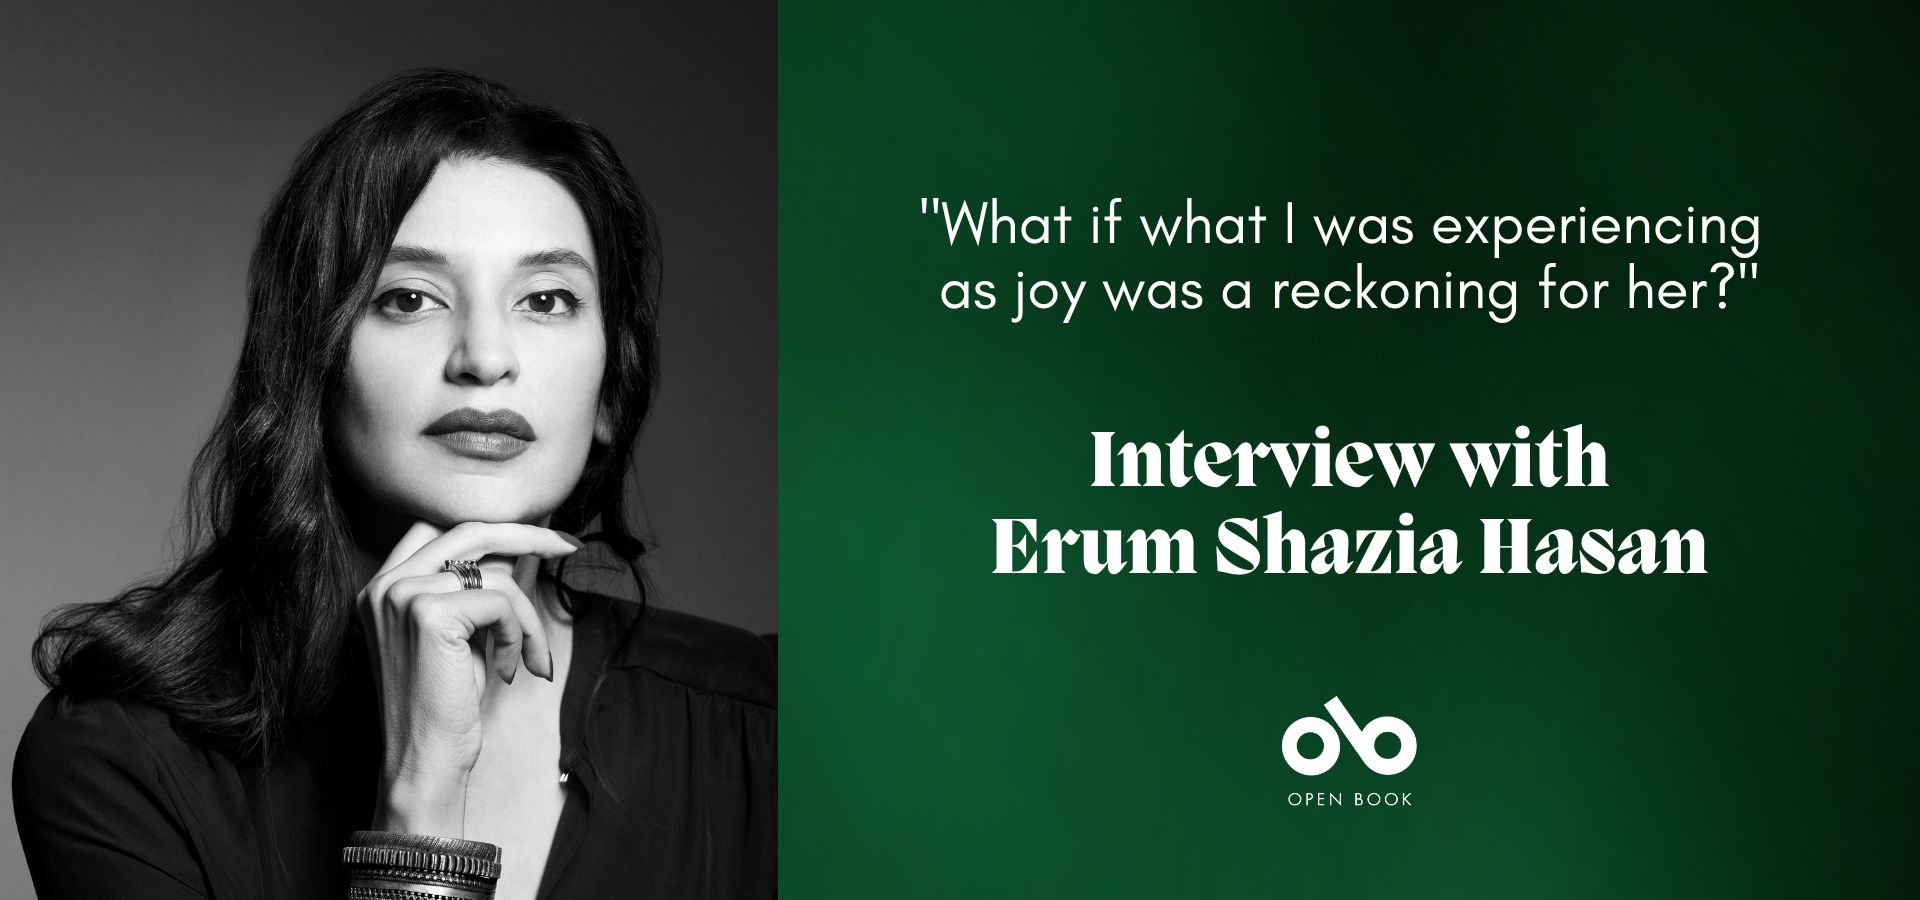 Green banner image with a photo of author Erum Shazia Hasan and the text "What if what I was experiencing as joy was a reckoning for her? interview with Erum Shazia Hasan". Open Book logo centred below text.